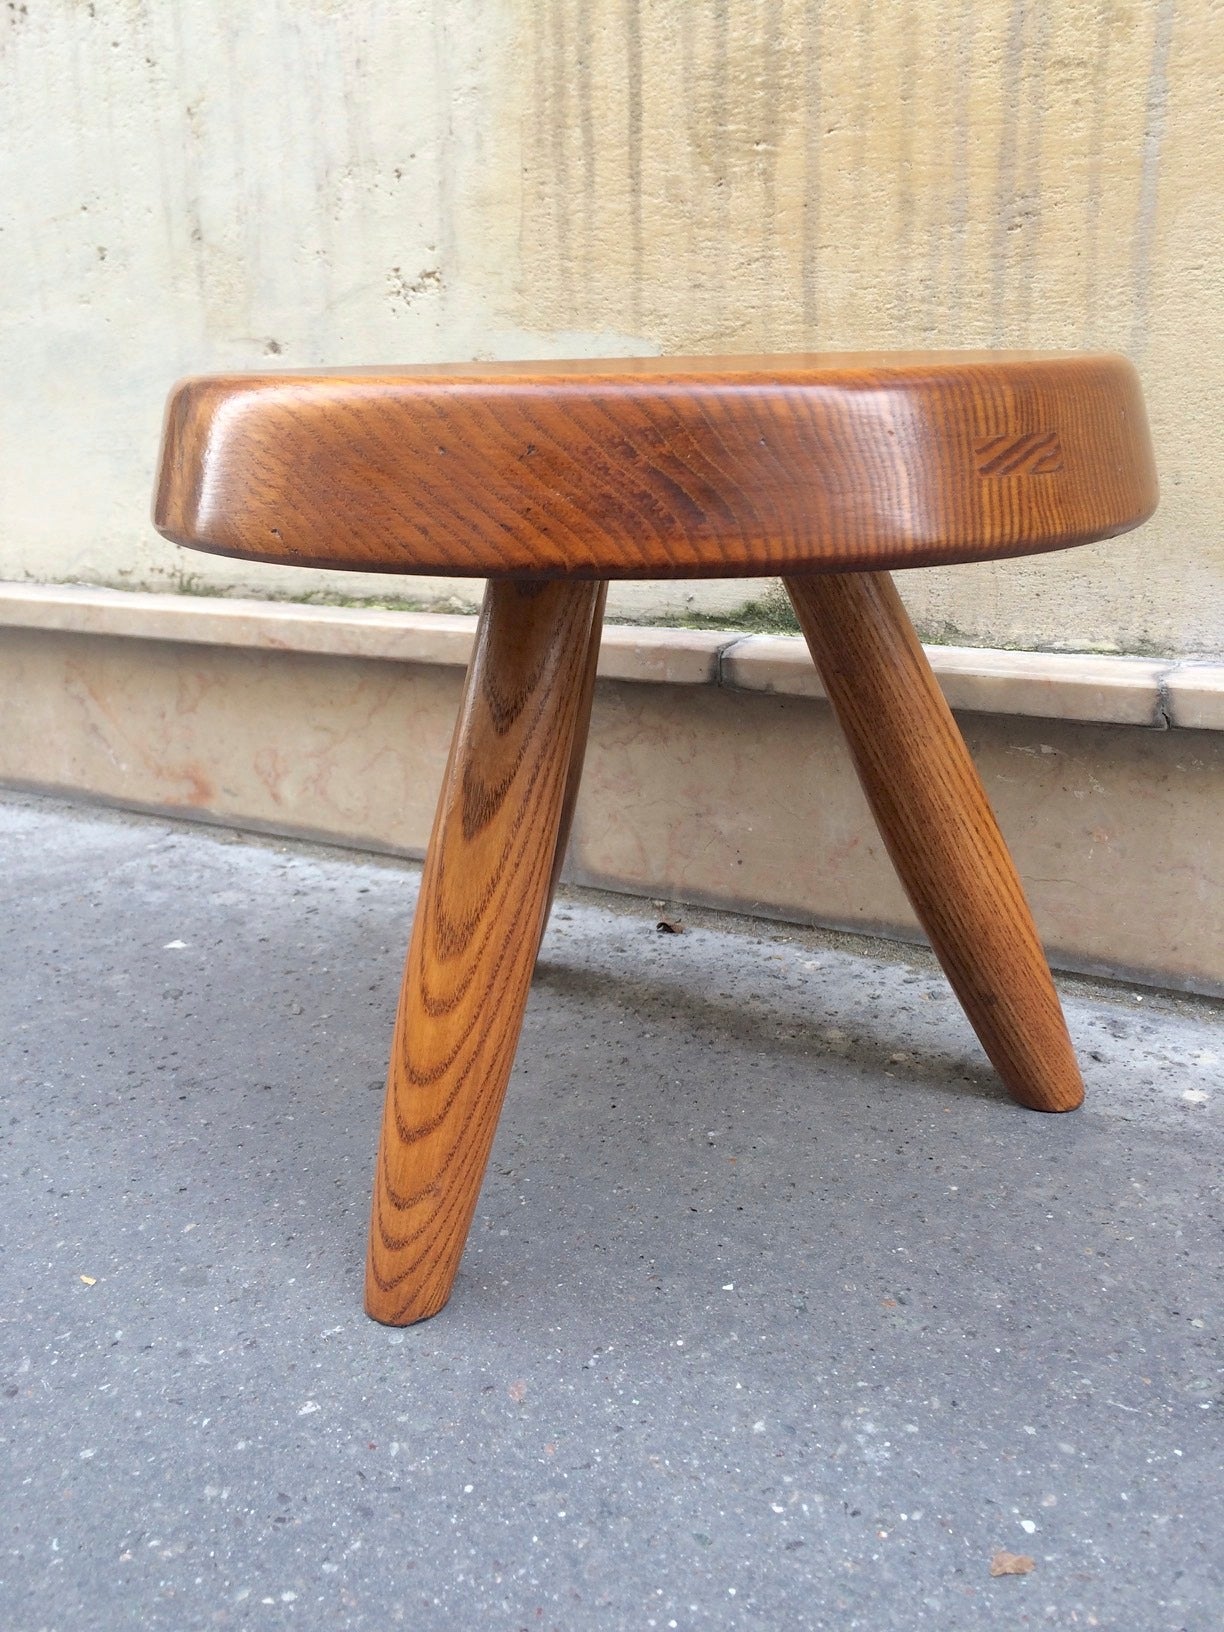 Charlotte Perriand Ash Tree Tripod Stool in Vintage Condition 2